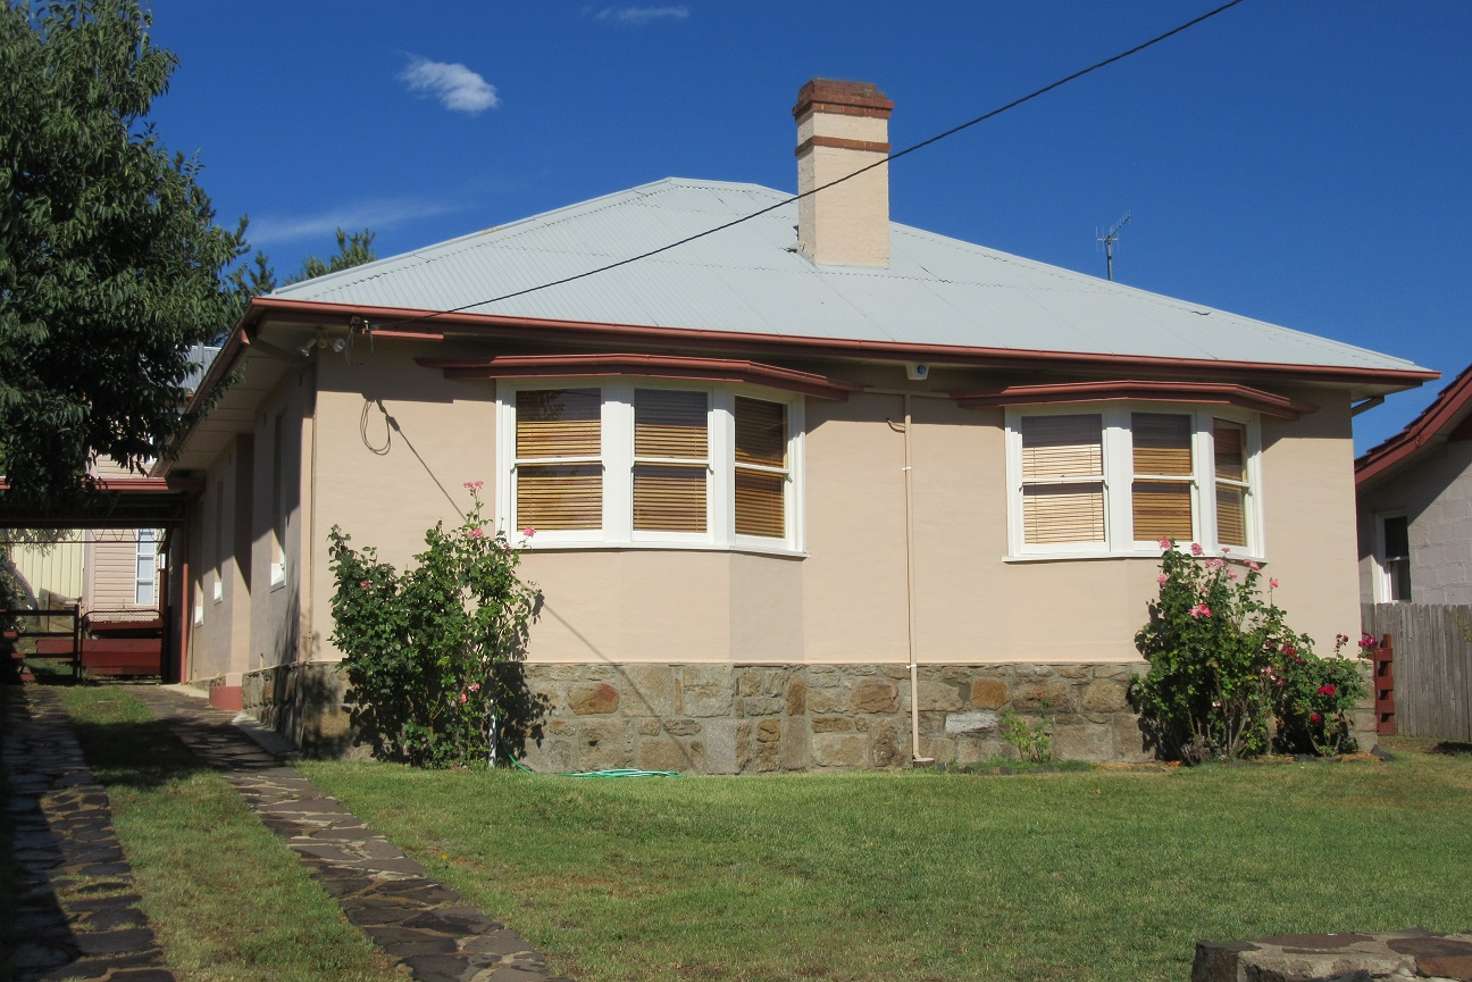 Main view of Homely house listing, 1/53 Soho st, Cooma NSW 2630